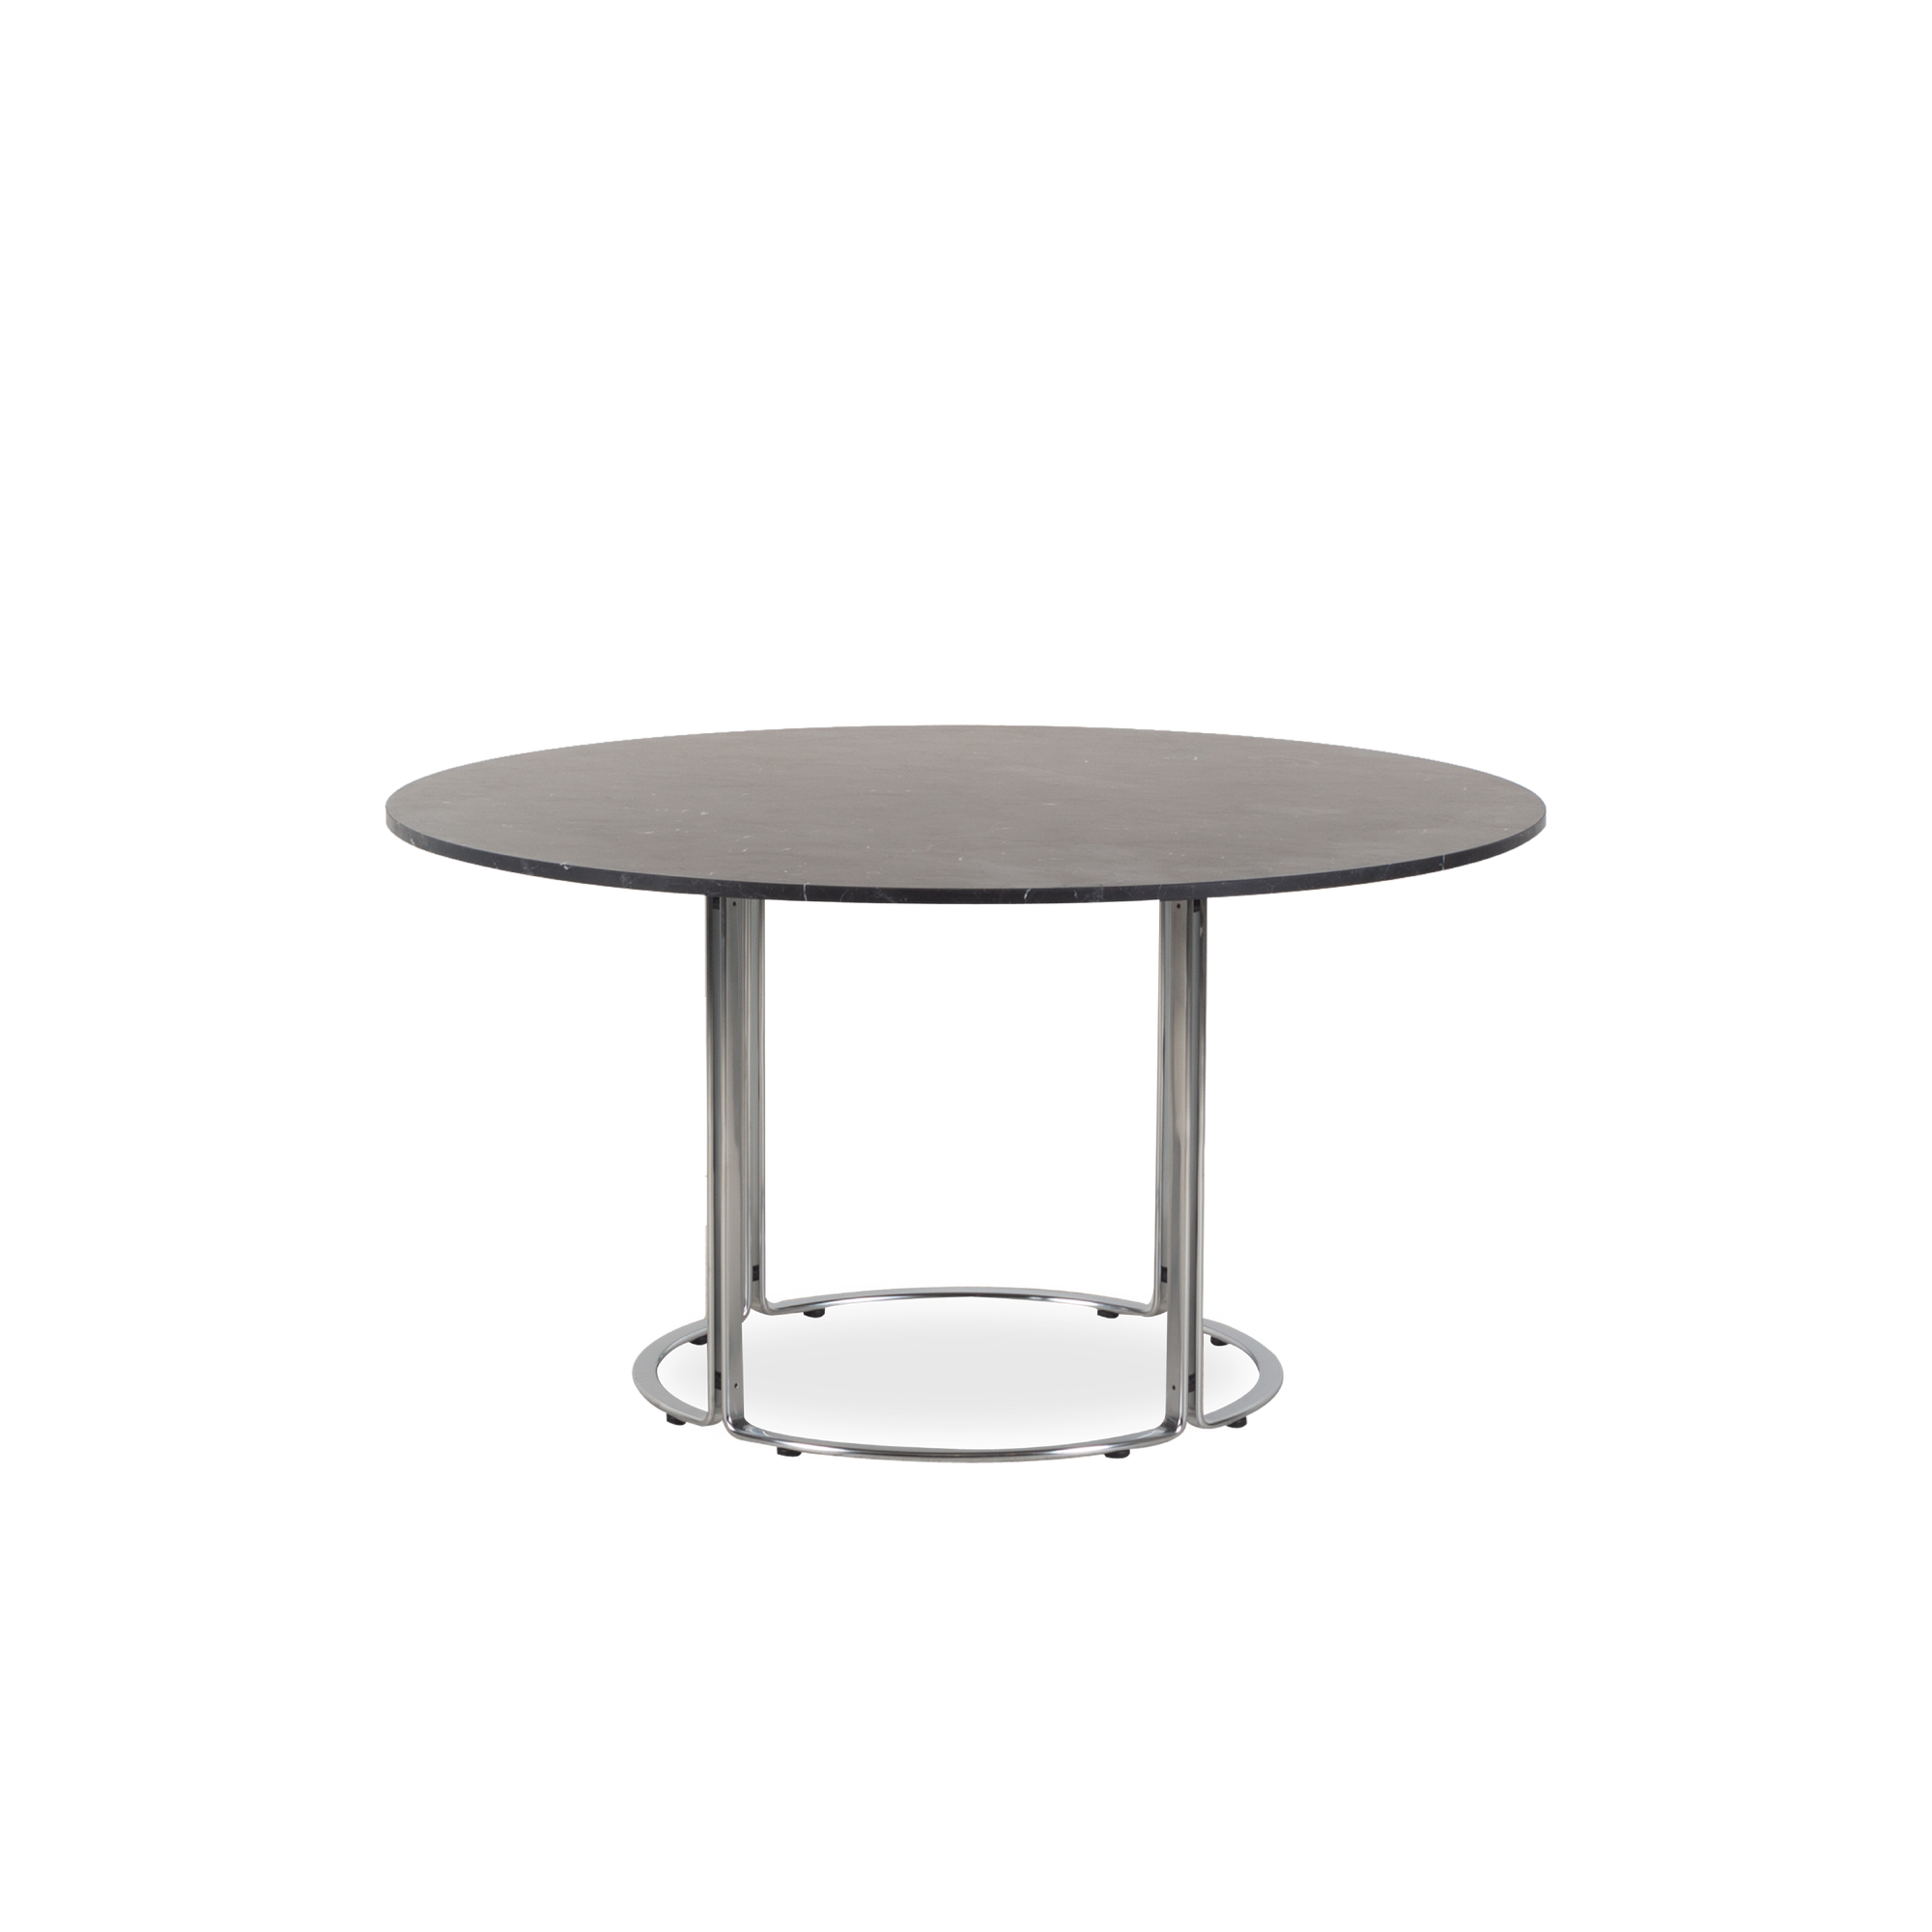 Designed by German designer Horst Bruning in the 1960s, the HB 120 Dining Table offers clean mid-century modern lines and architectural intrigue.